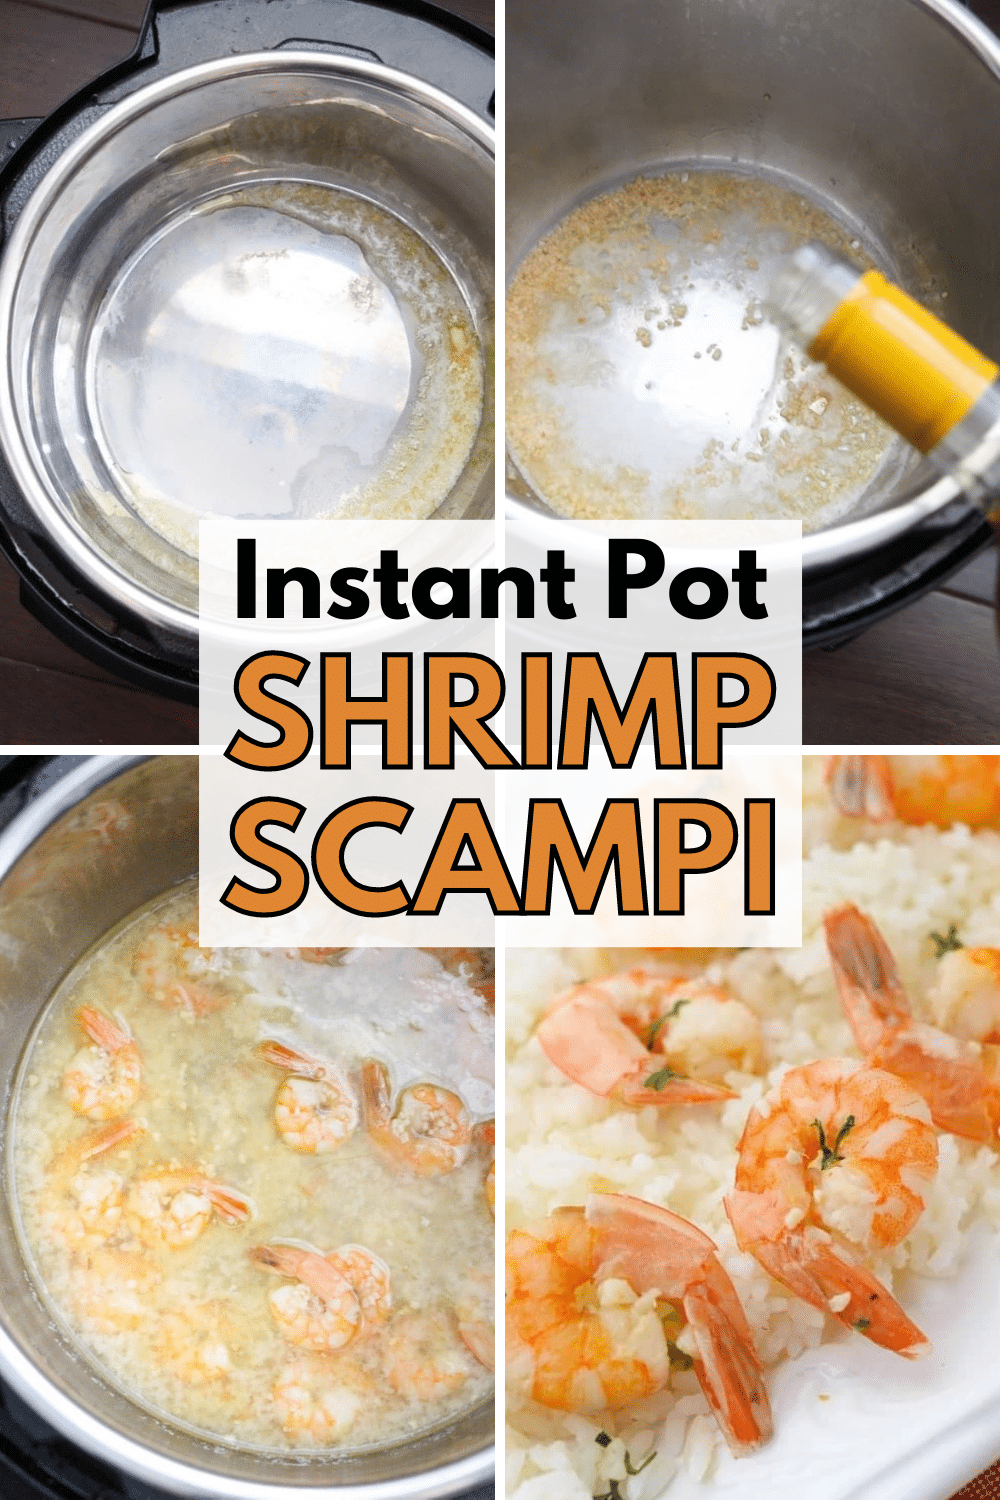 This Instant Pot Shrimp Scampi is quick and easy and perfect served over rice or pasta. So much lemony garlic flavor, so little work! #instantpot #pressurecooker #shrimpscampi #shrimp via @wondermomwannab